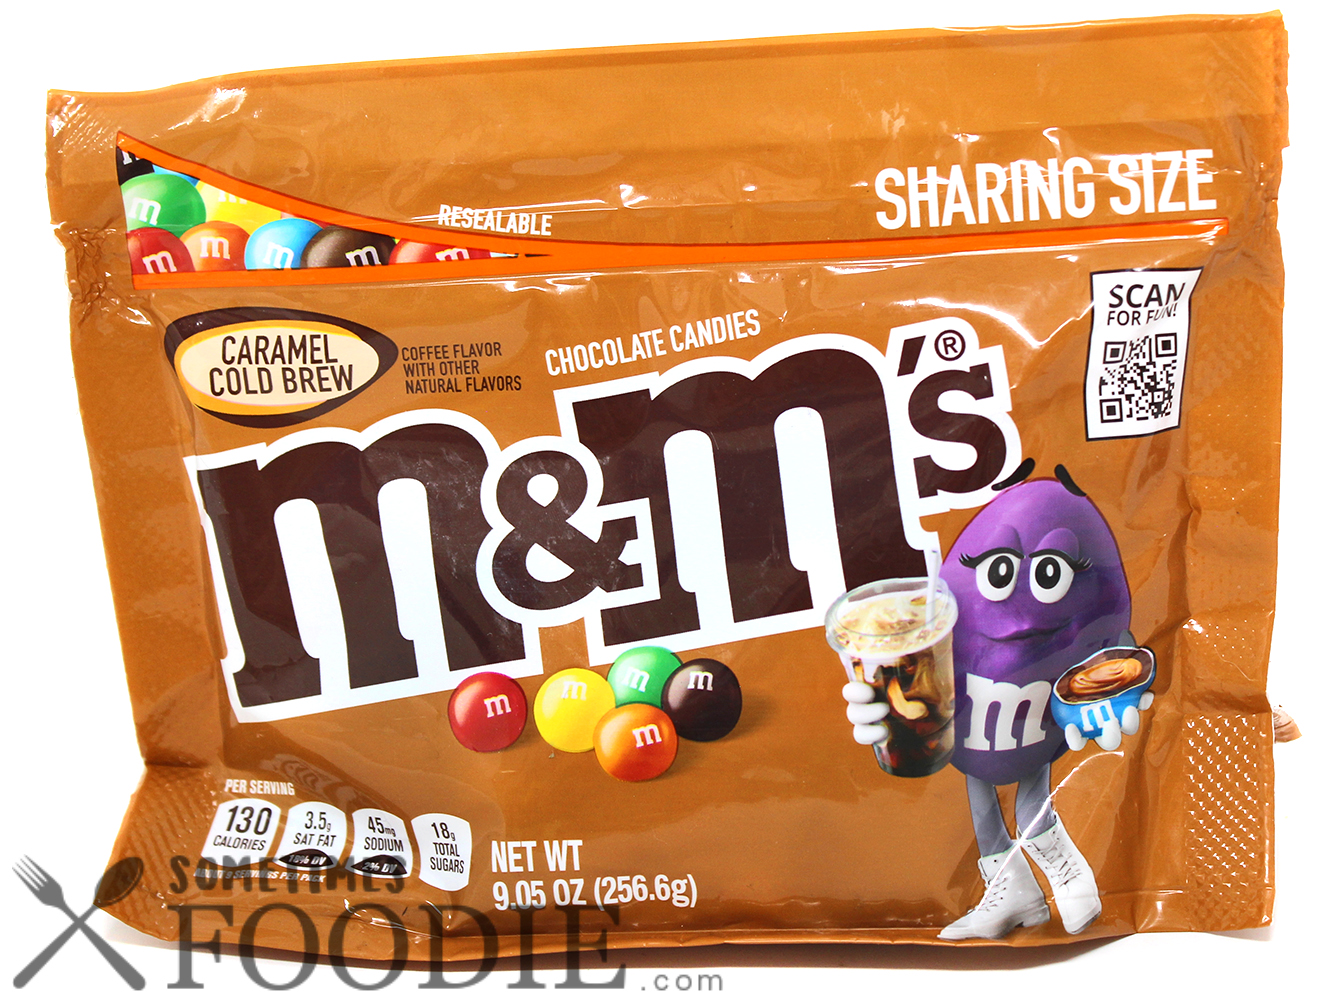 Sometimes Foodie: What's cooler than being cool? - m&m's Caramel Cold Brew